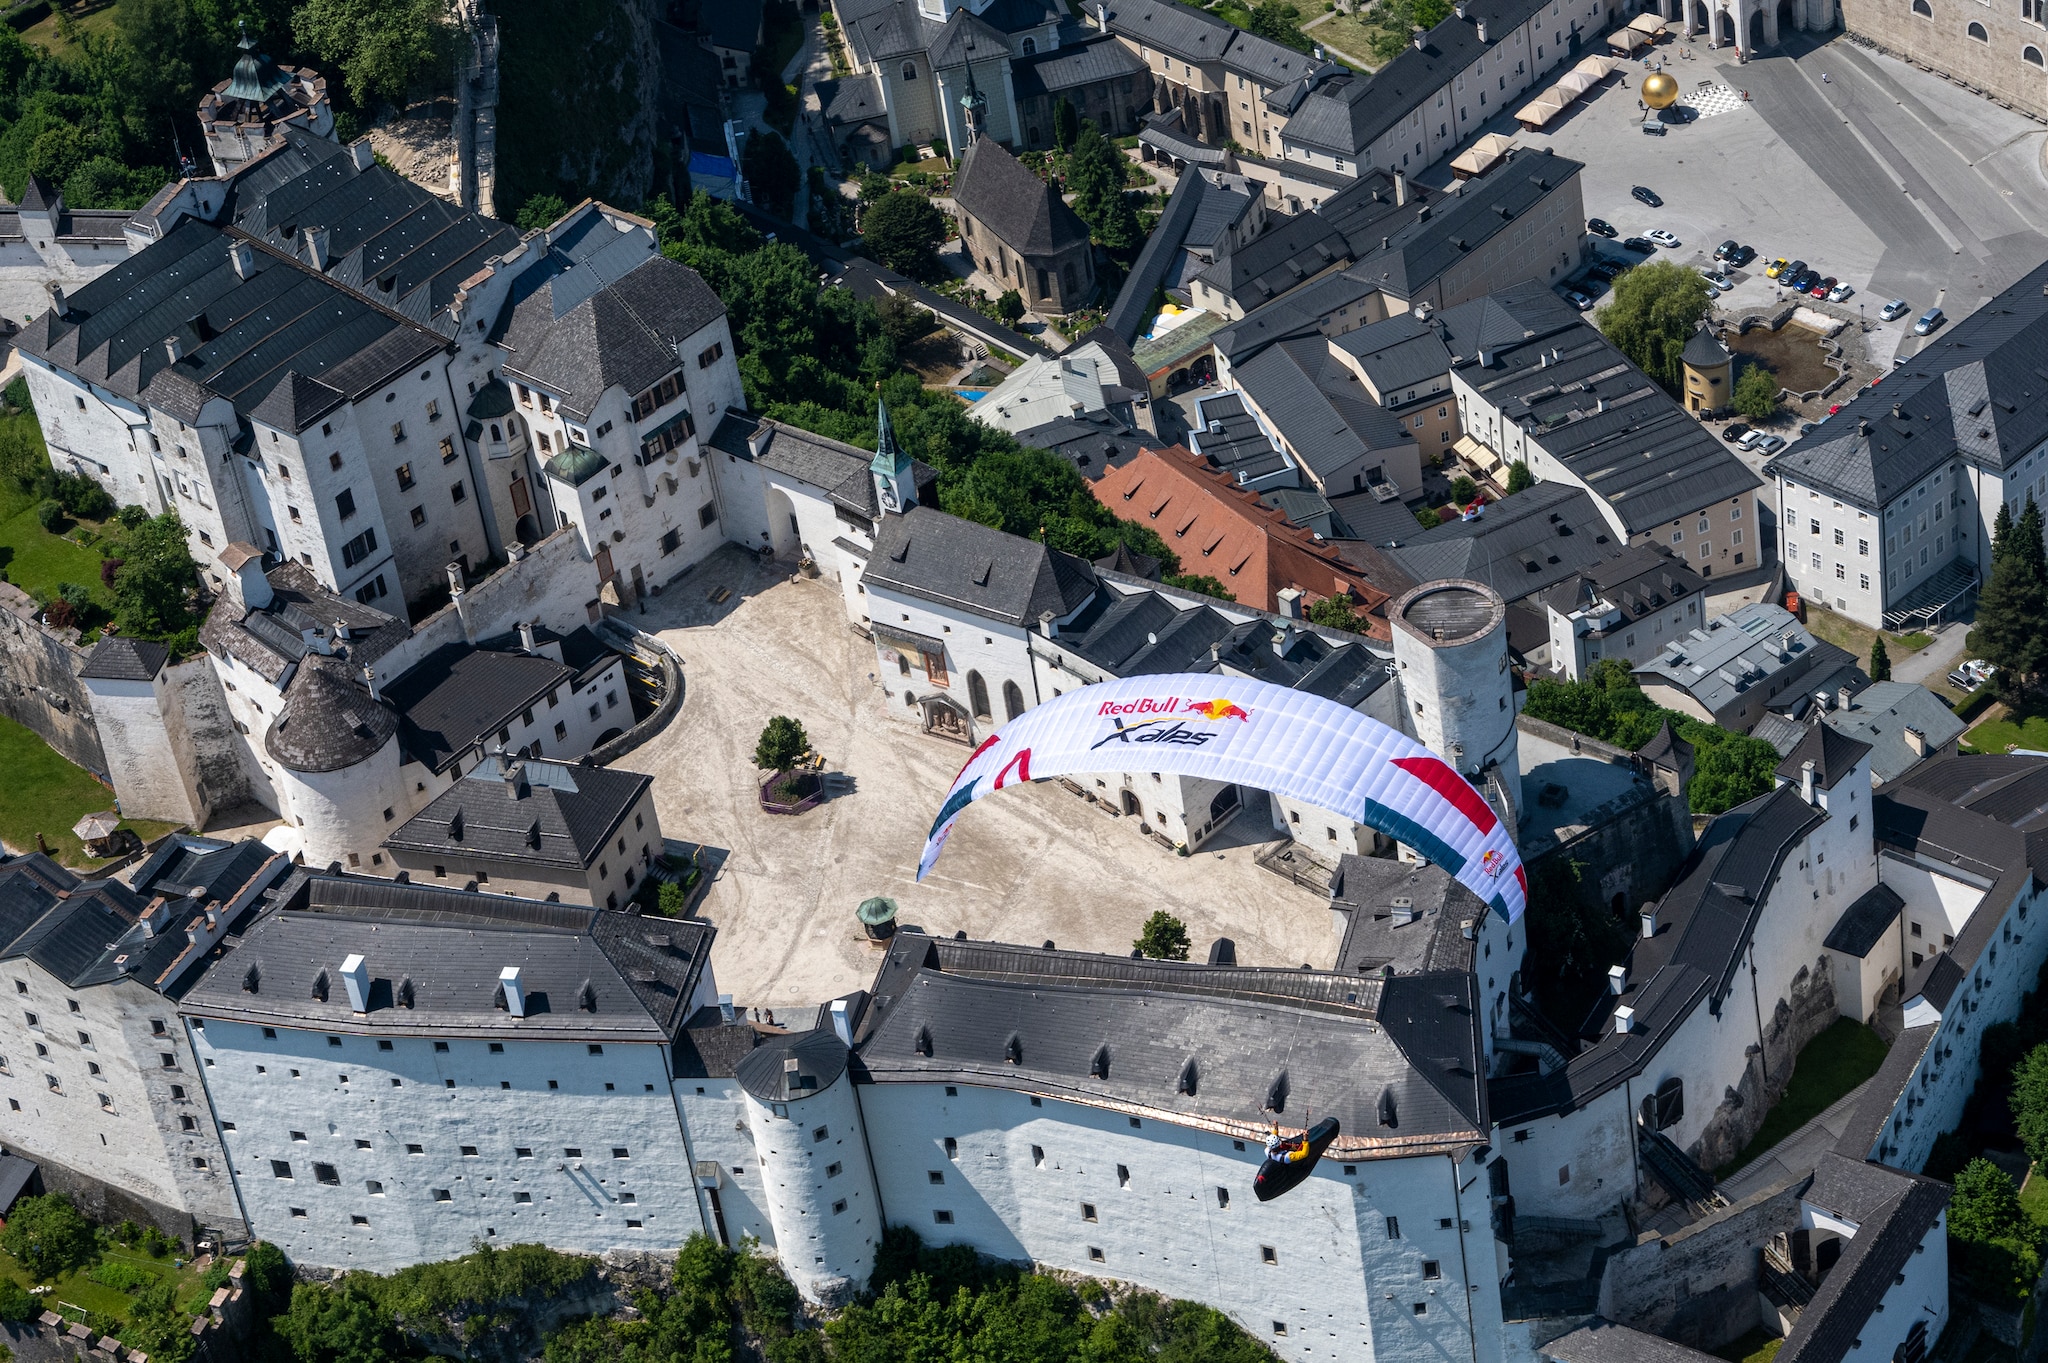 Participant flies during the Red Bull X-Alps preparations in Salzburg, Austria on June 18, 2021